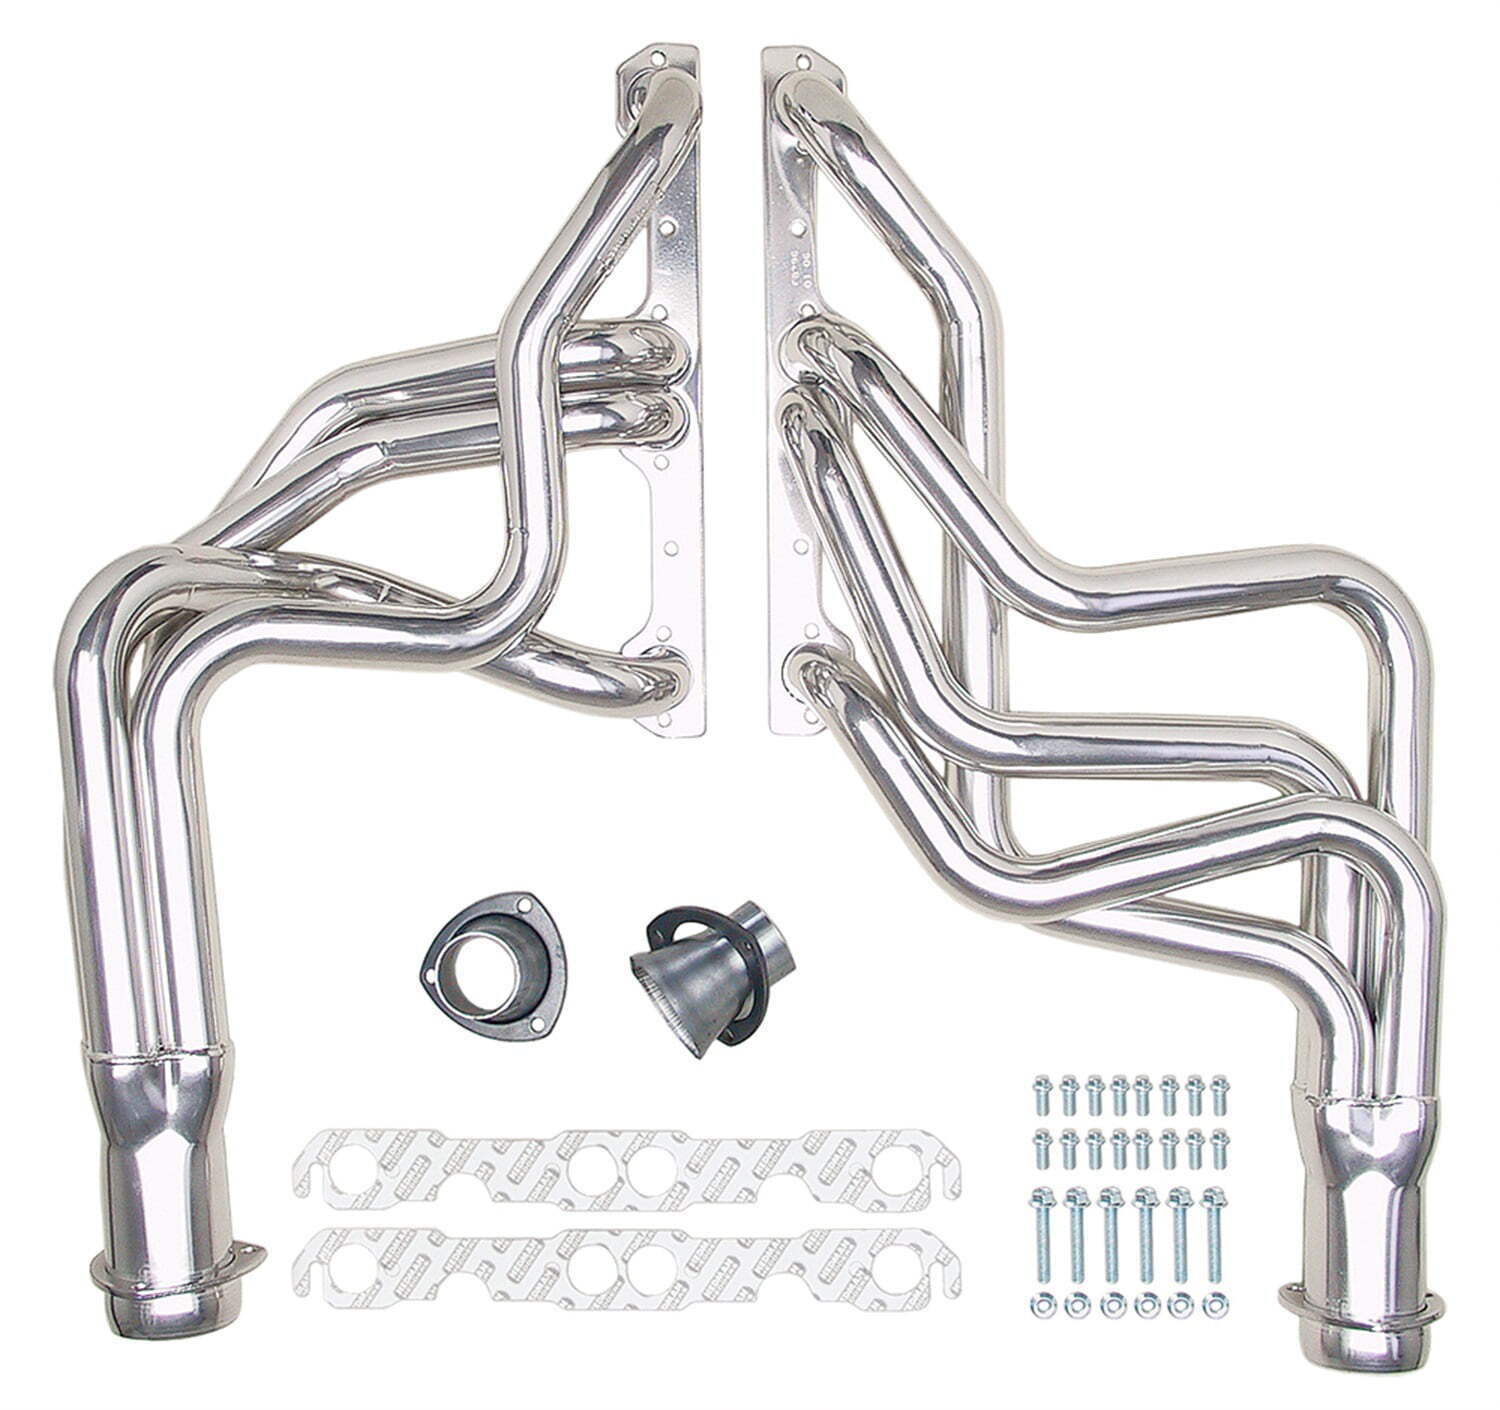 Hedman Performance Group 68296 Chevy Pass Chevelle H.t.c